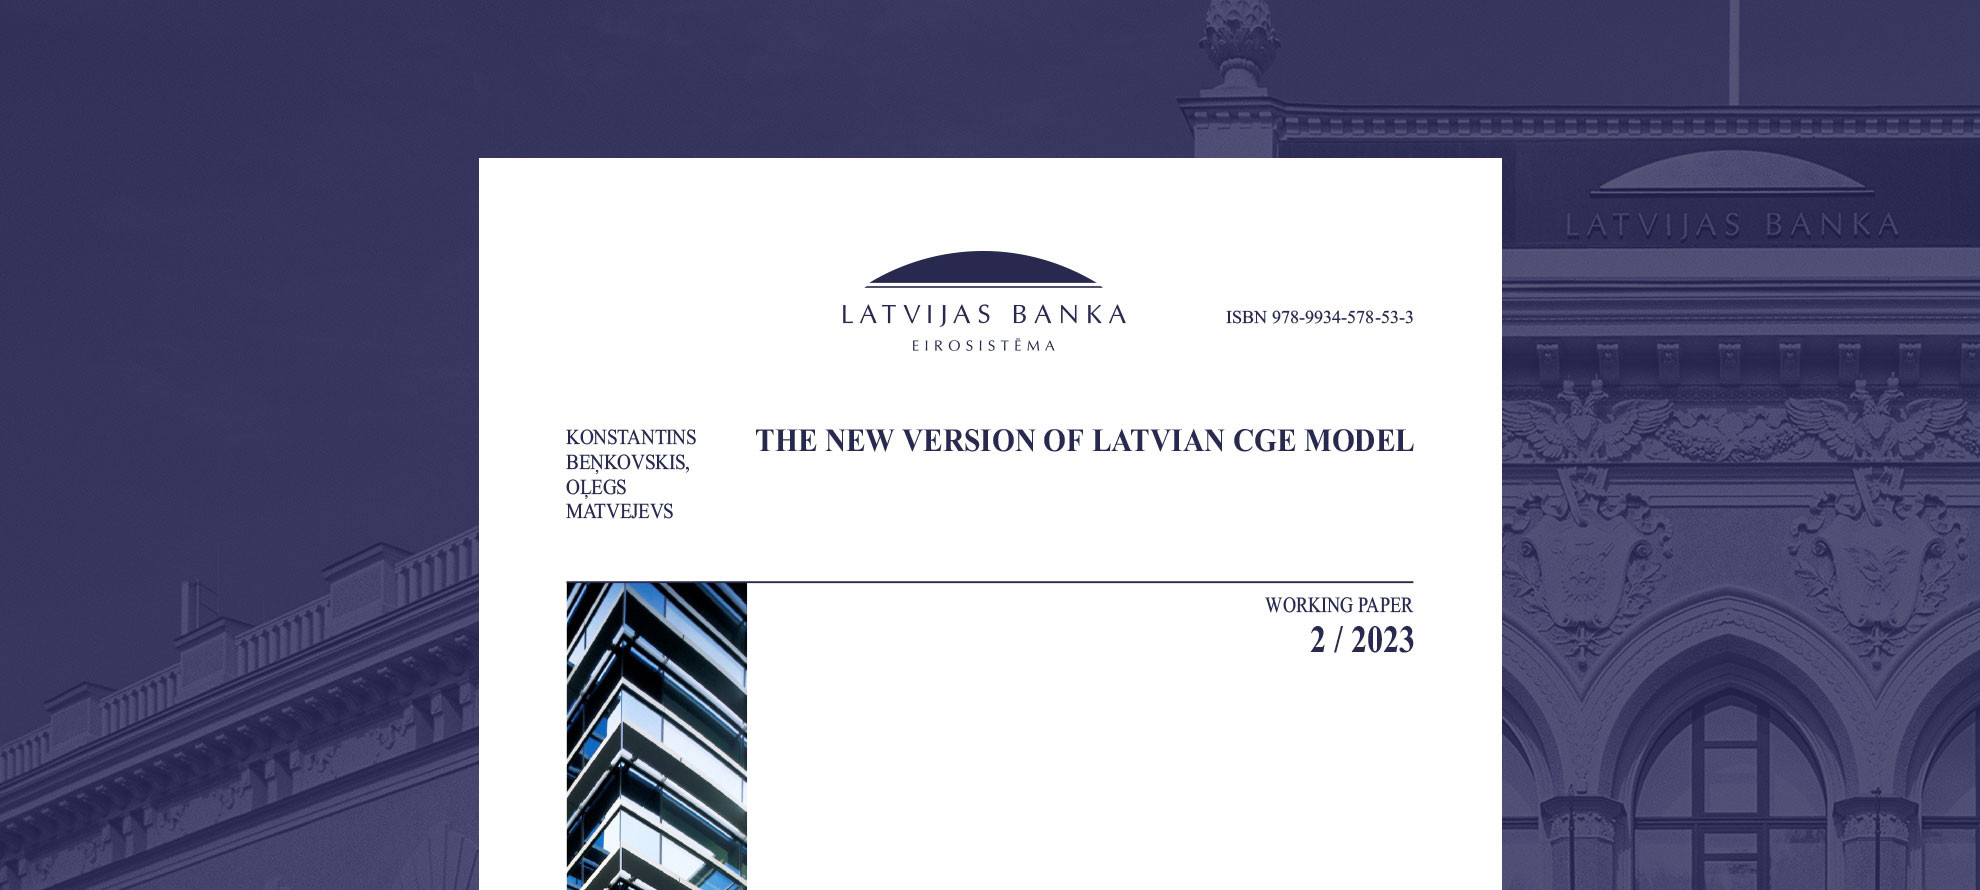 The New Version of Latvian CGE Model